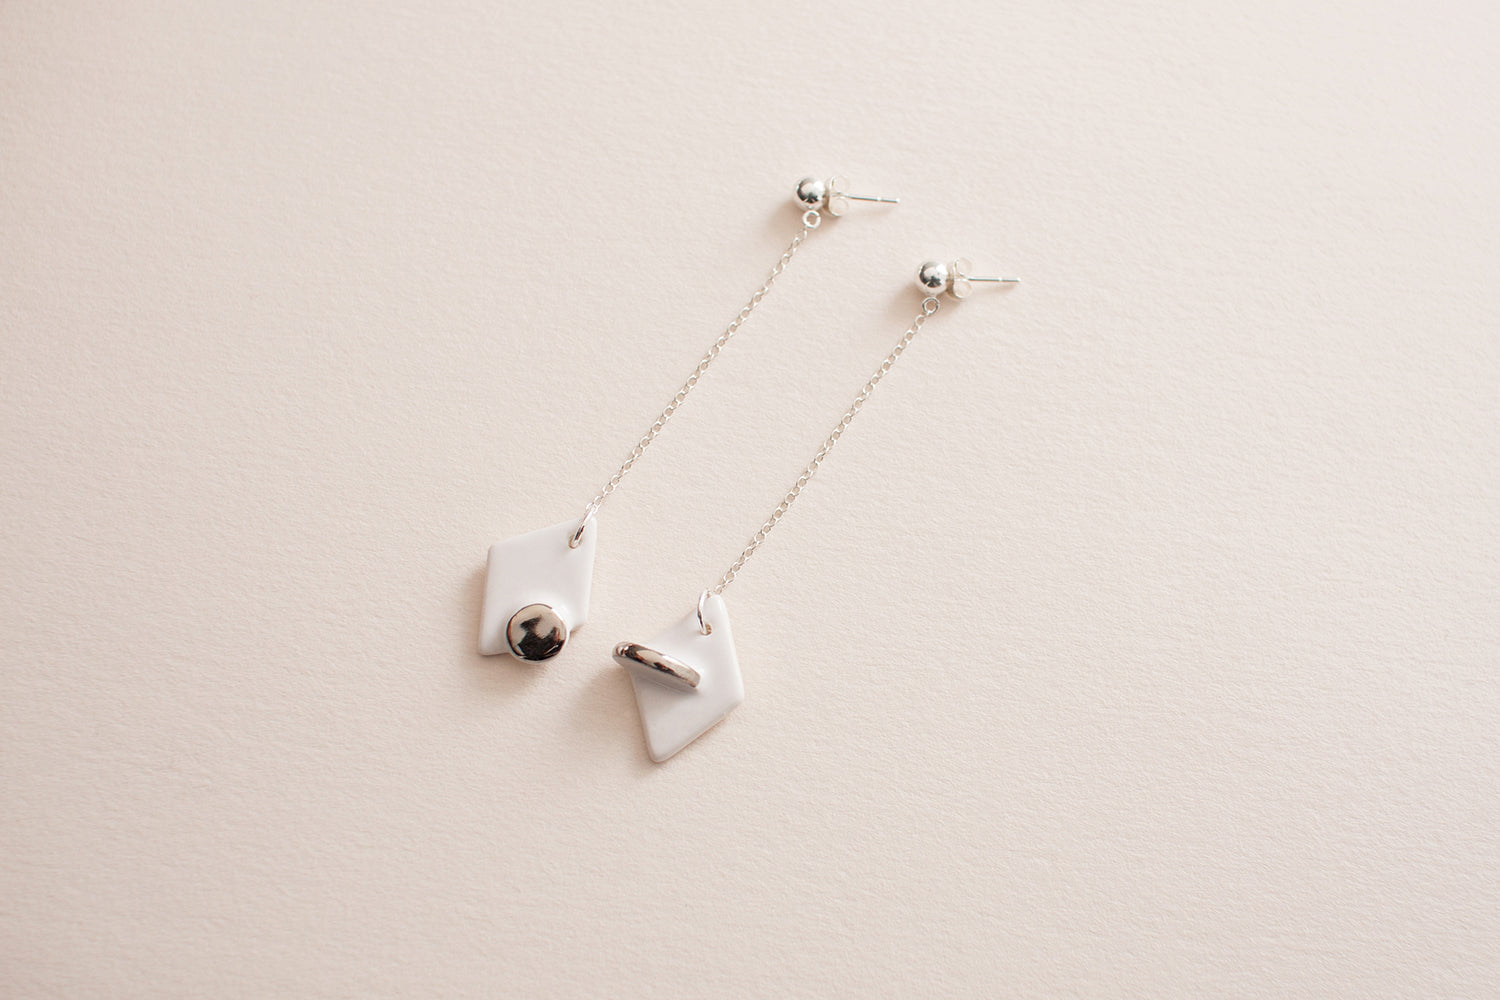 Earrings 103 | Objects by Victoria Chin